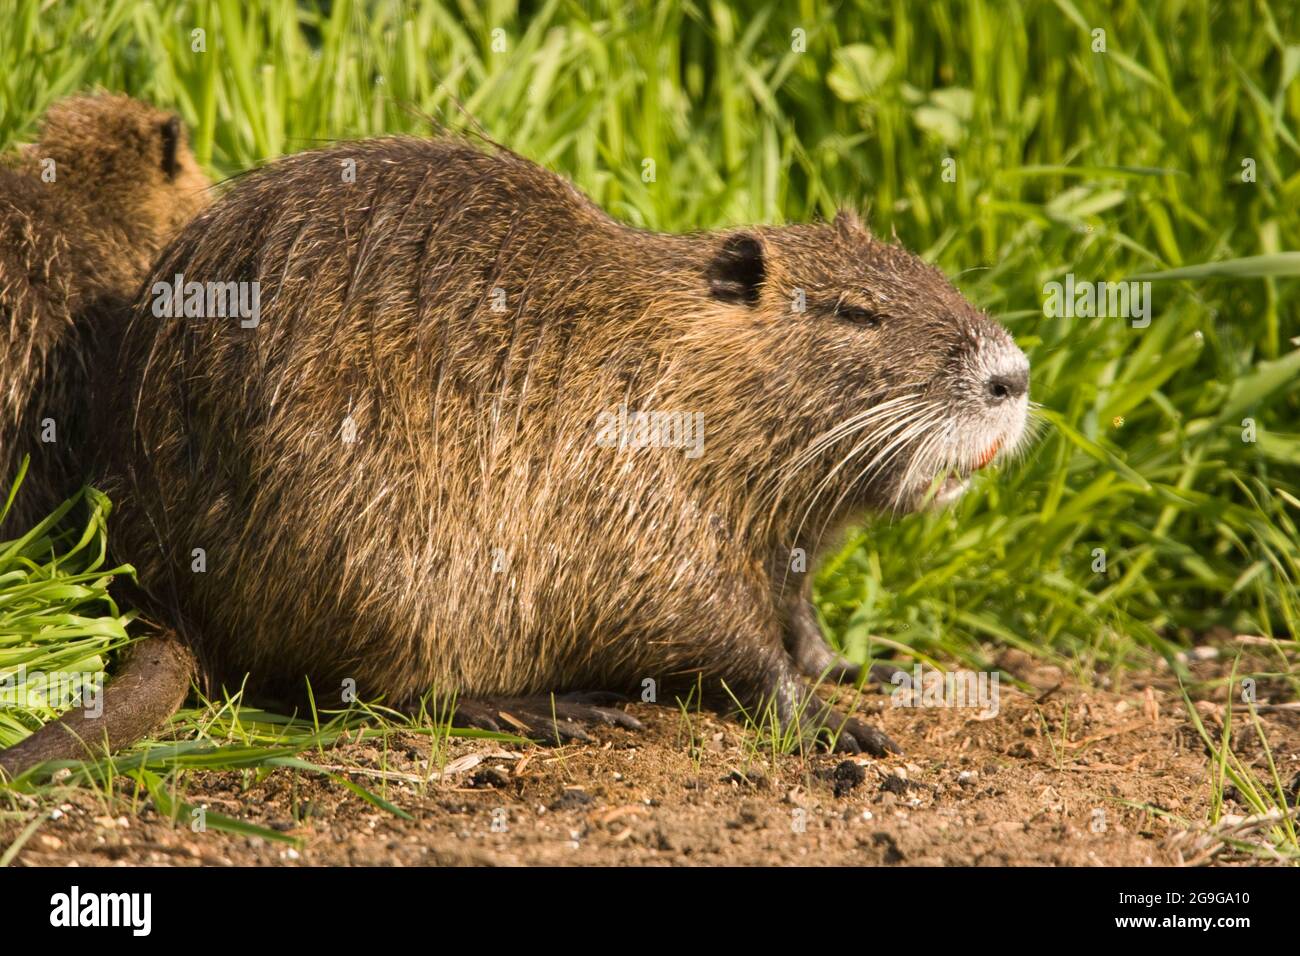 coypu, or nutria (Myocastor coypus)  is a herbivorous semi-aquatic rodent that feeds on river plants and lives in burrows along river banks. It is nat Stock Photo